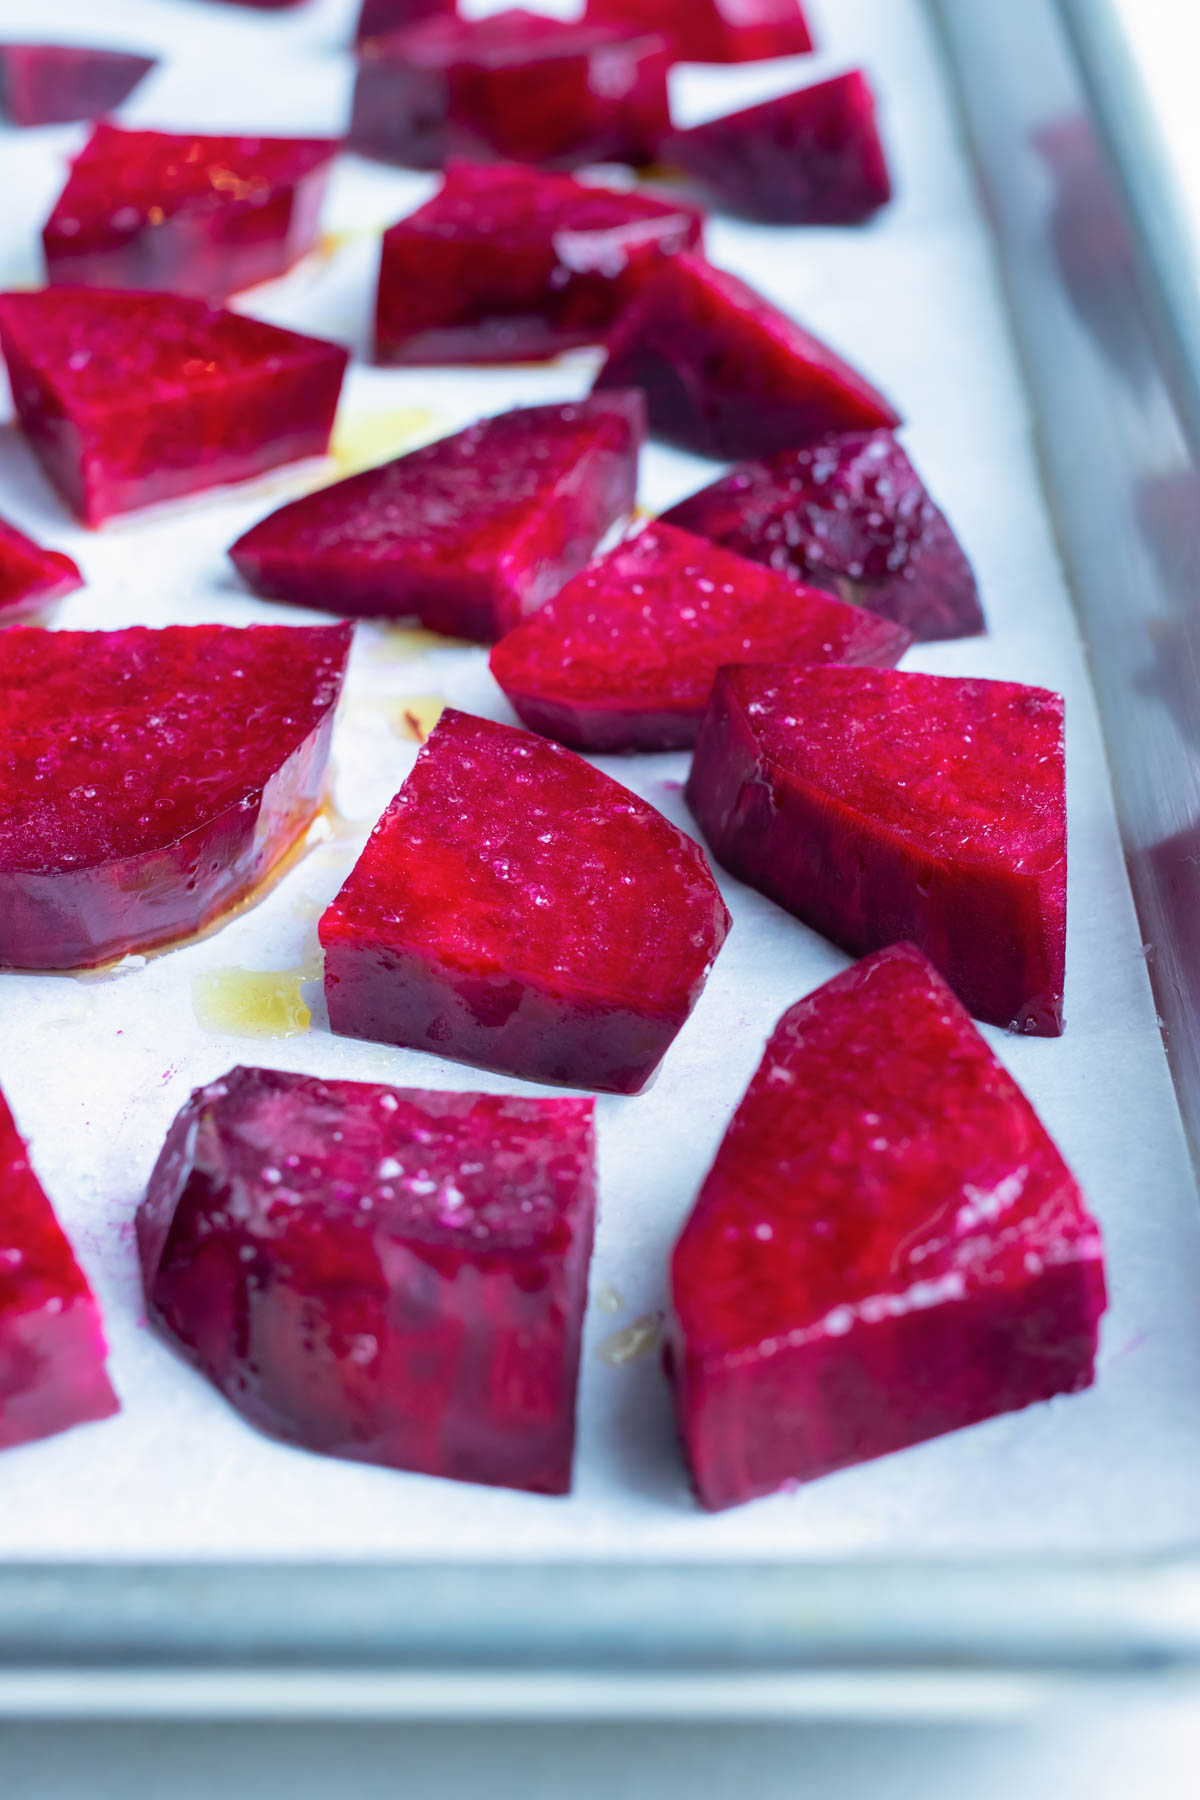 Cubed beets are roasted in the oven with olive oil.